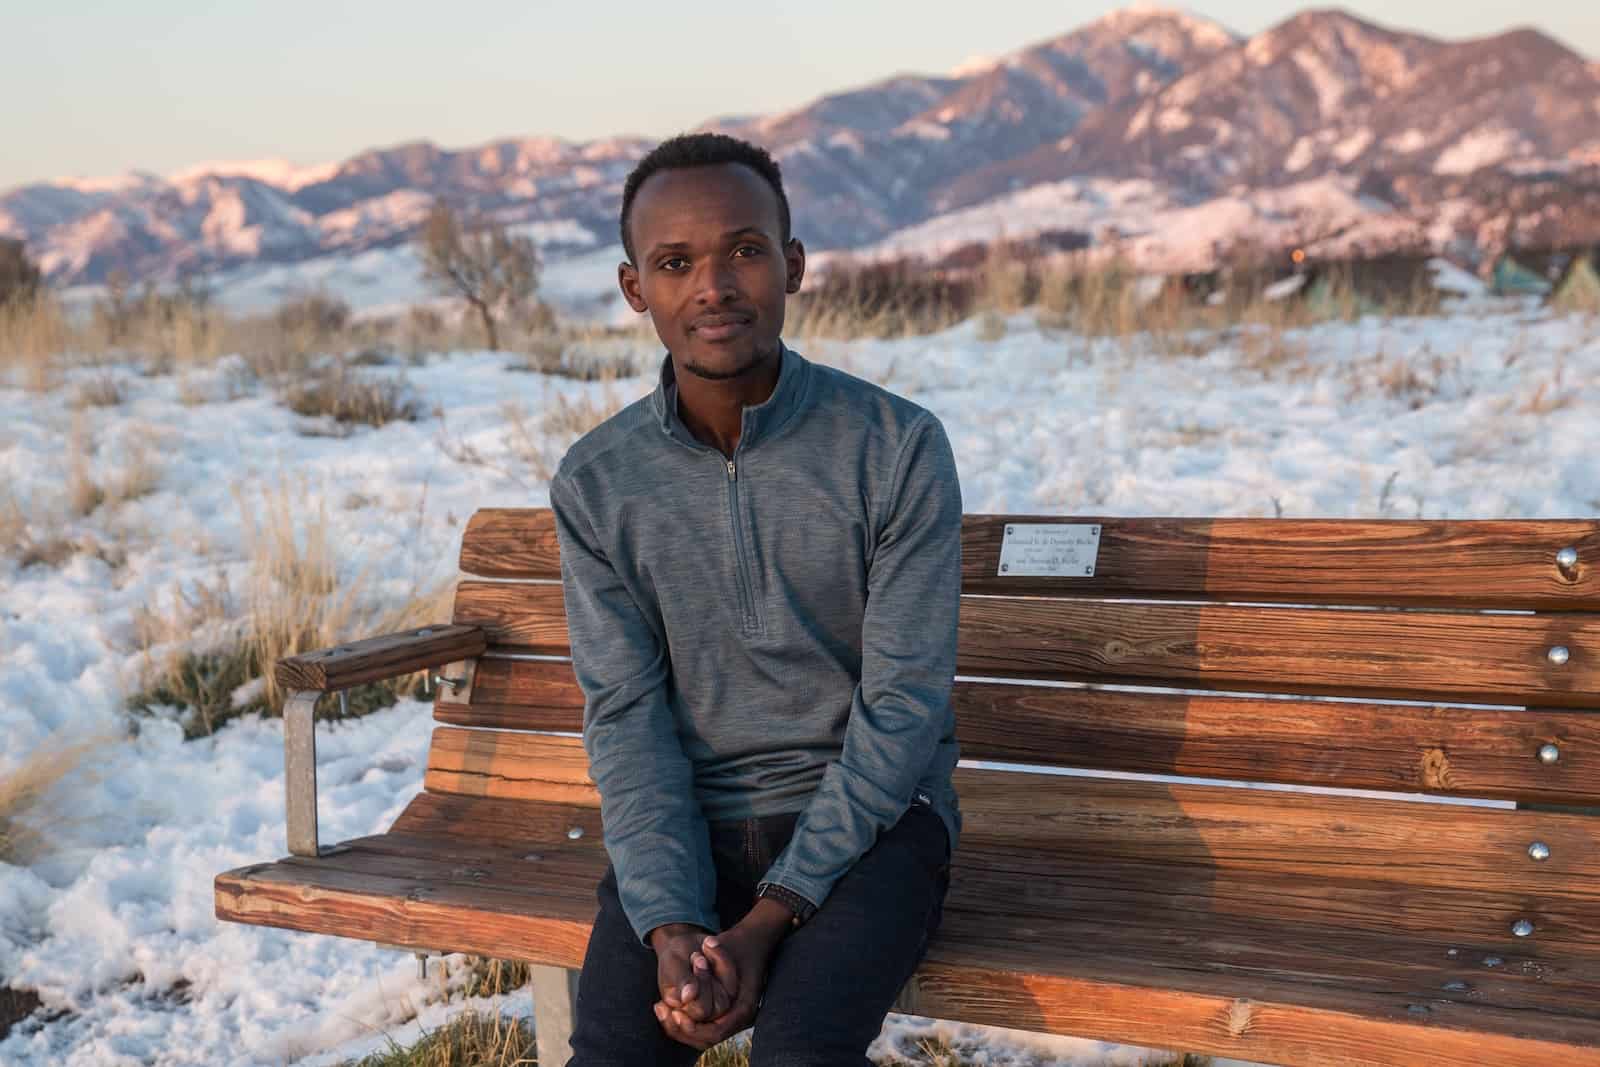 A man in a grey sweater sits on a bench in front of snowy hills.